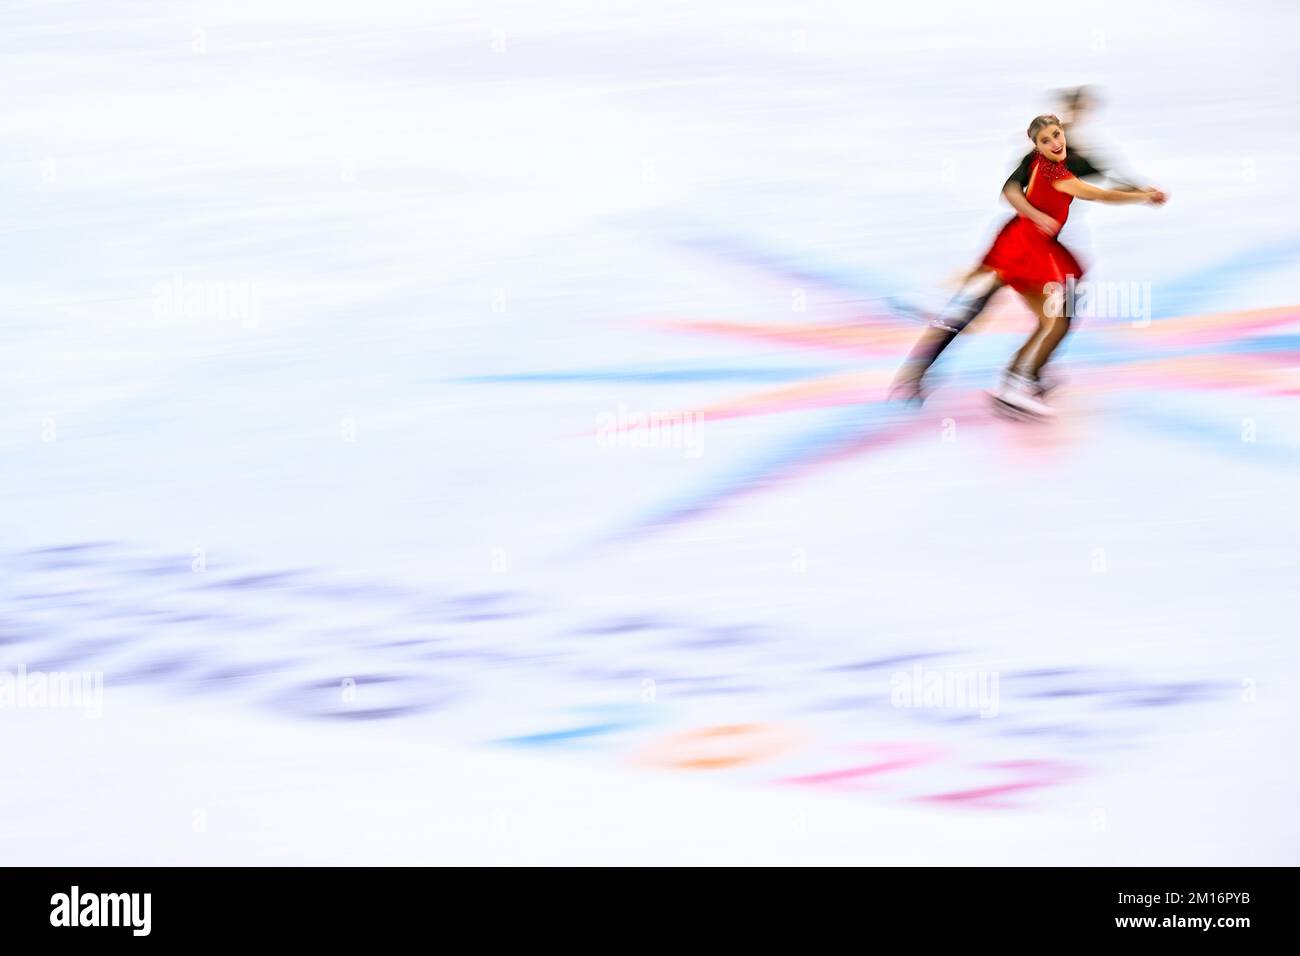 Turin, Italy. 10th Dec, 2022. US Madison Chock and Evan Bates compete in the Ice Dance Rhythm Dance at the ISU Grand Prix of Figure Skating Final 2022 in Turin, Italy, Saturday 10 December 2022. BELGA PHOTO JASPER JACOBS Credit: Belga News Agency/Alamy Live News Stock Photo